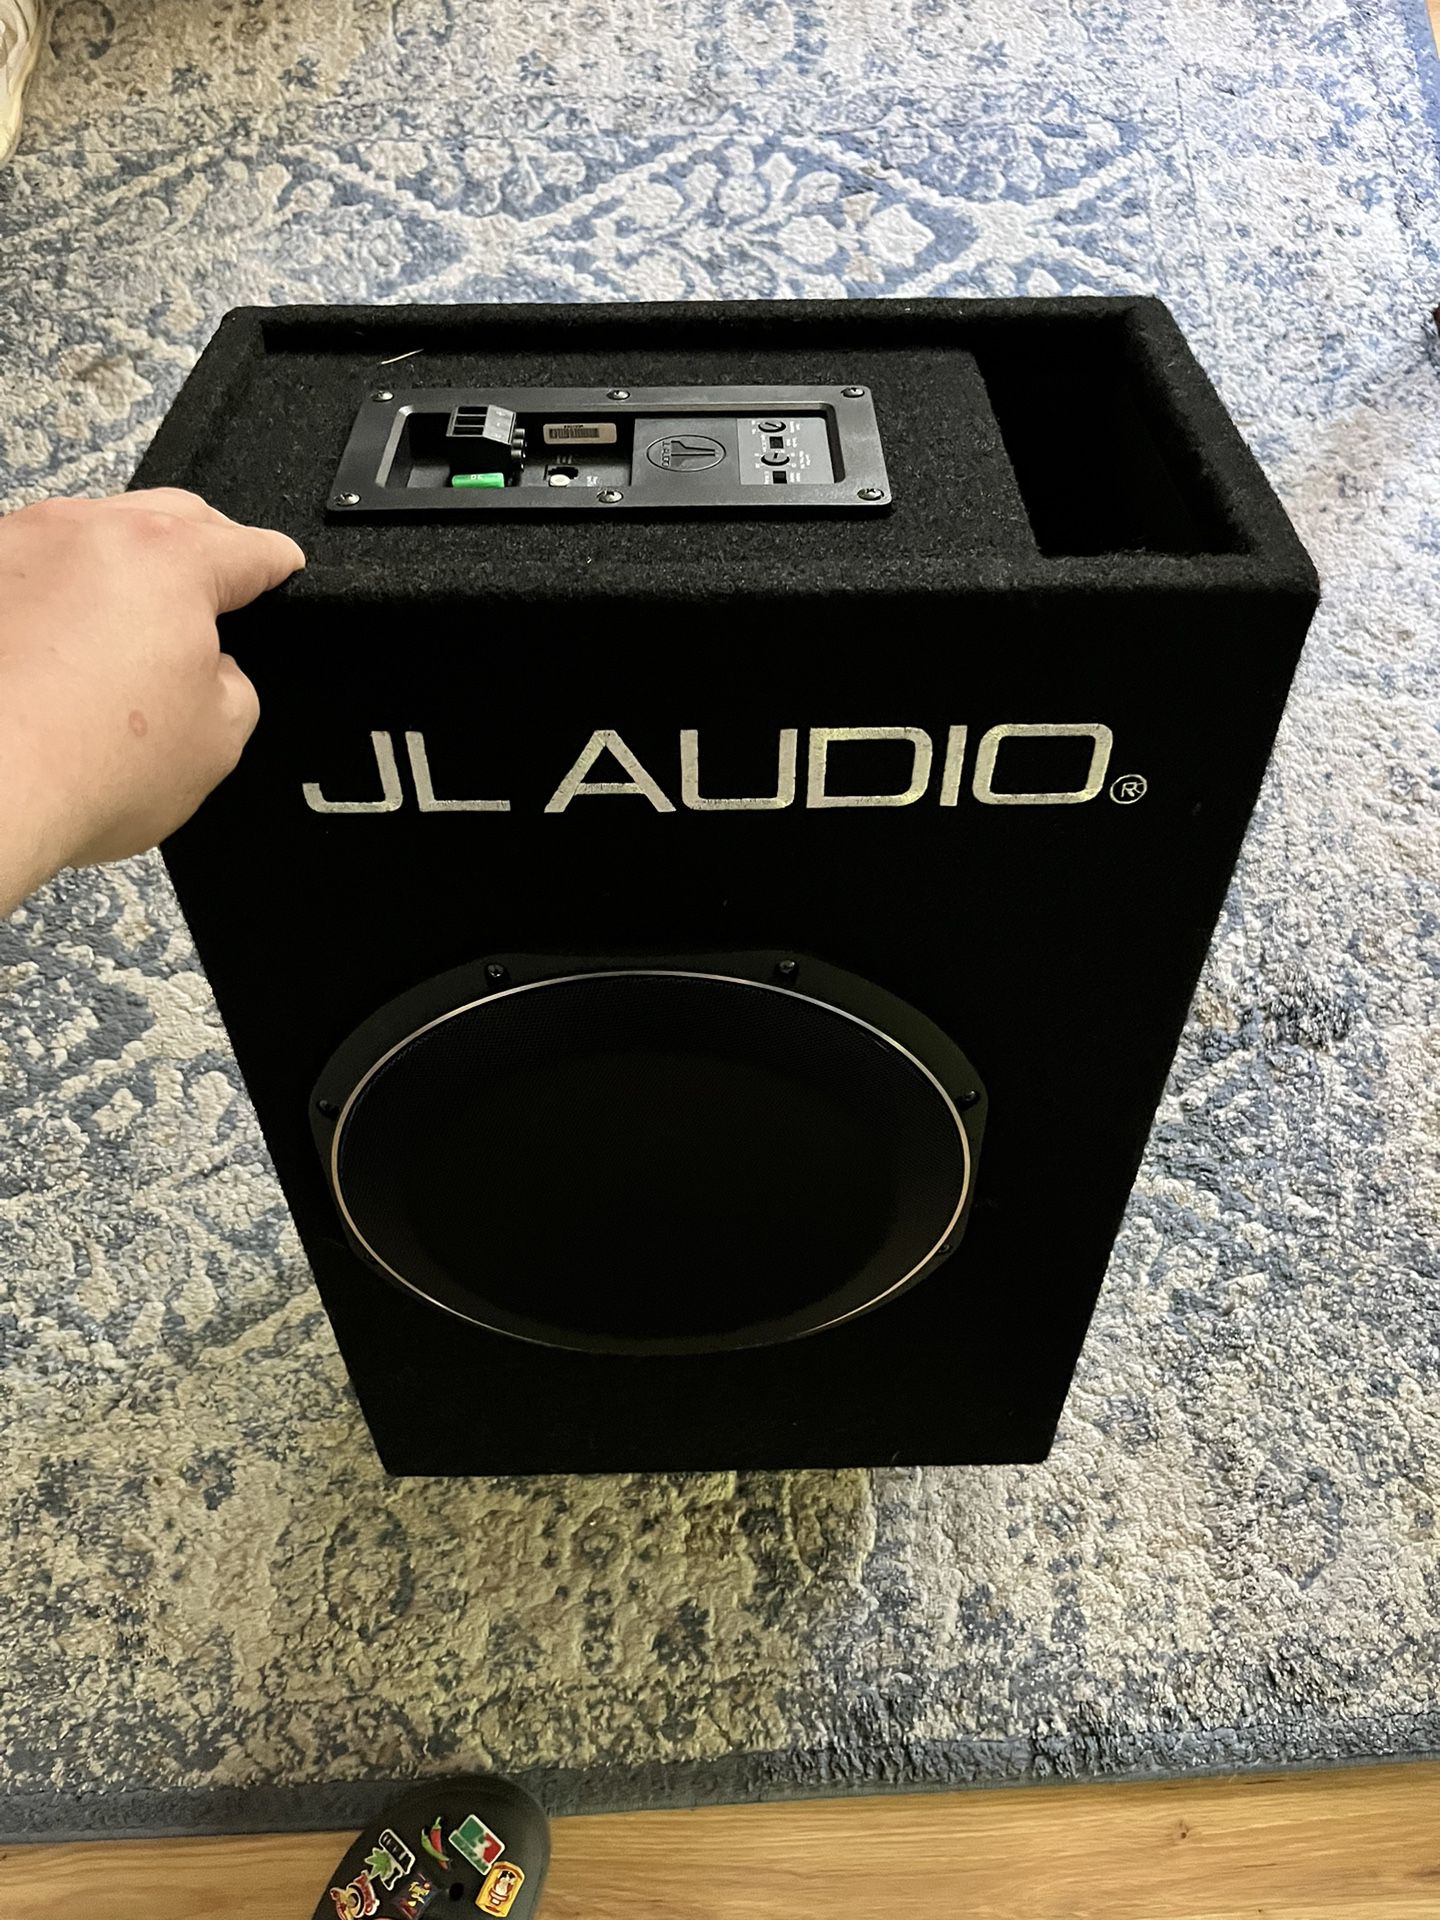 JL AUDIO SUBWOOFER WITH BUILT IN AMP